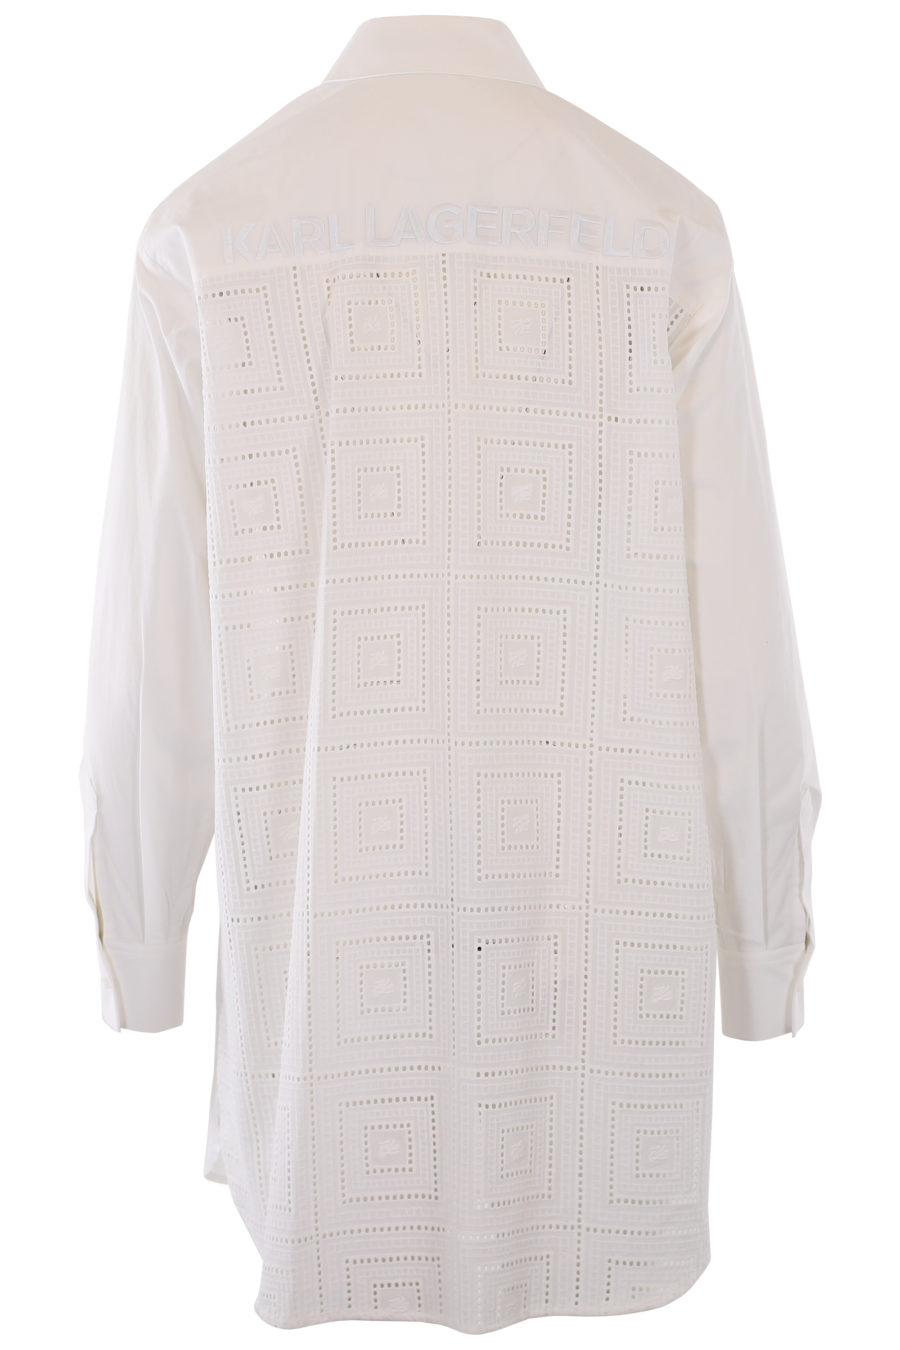 Long white shirt with logo and embroidered details - IMG 1246